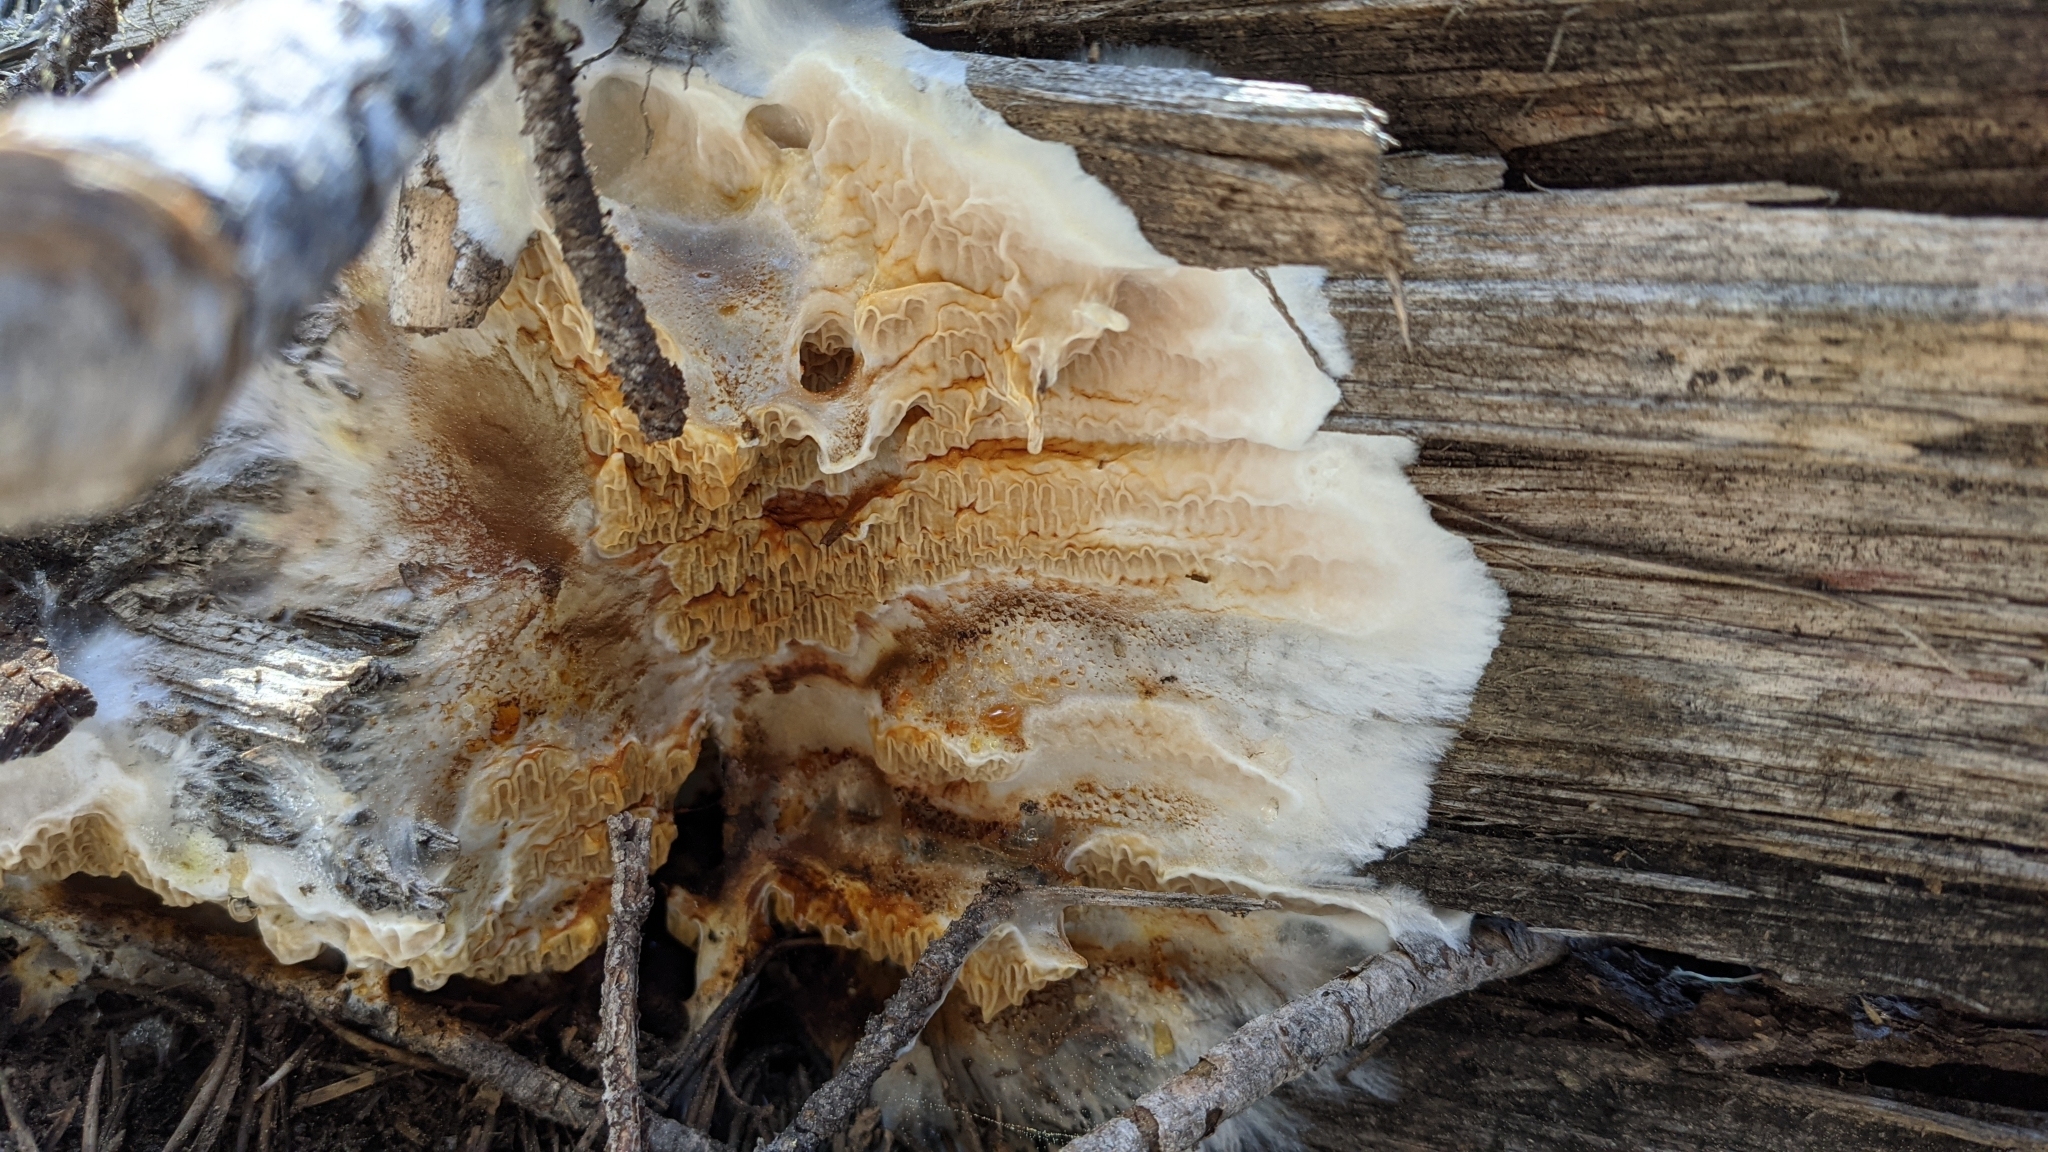 A fungus growing in a flat mat on a log. Part of it is wrinkled and skin-like.